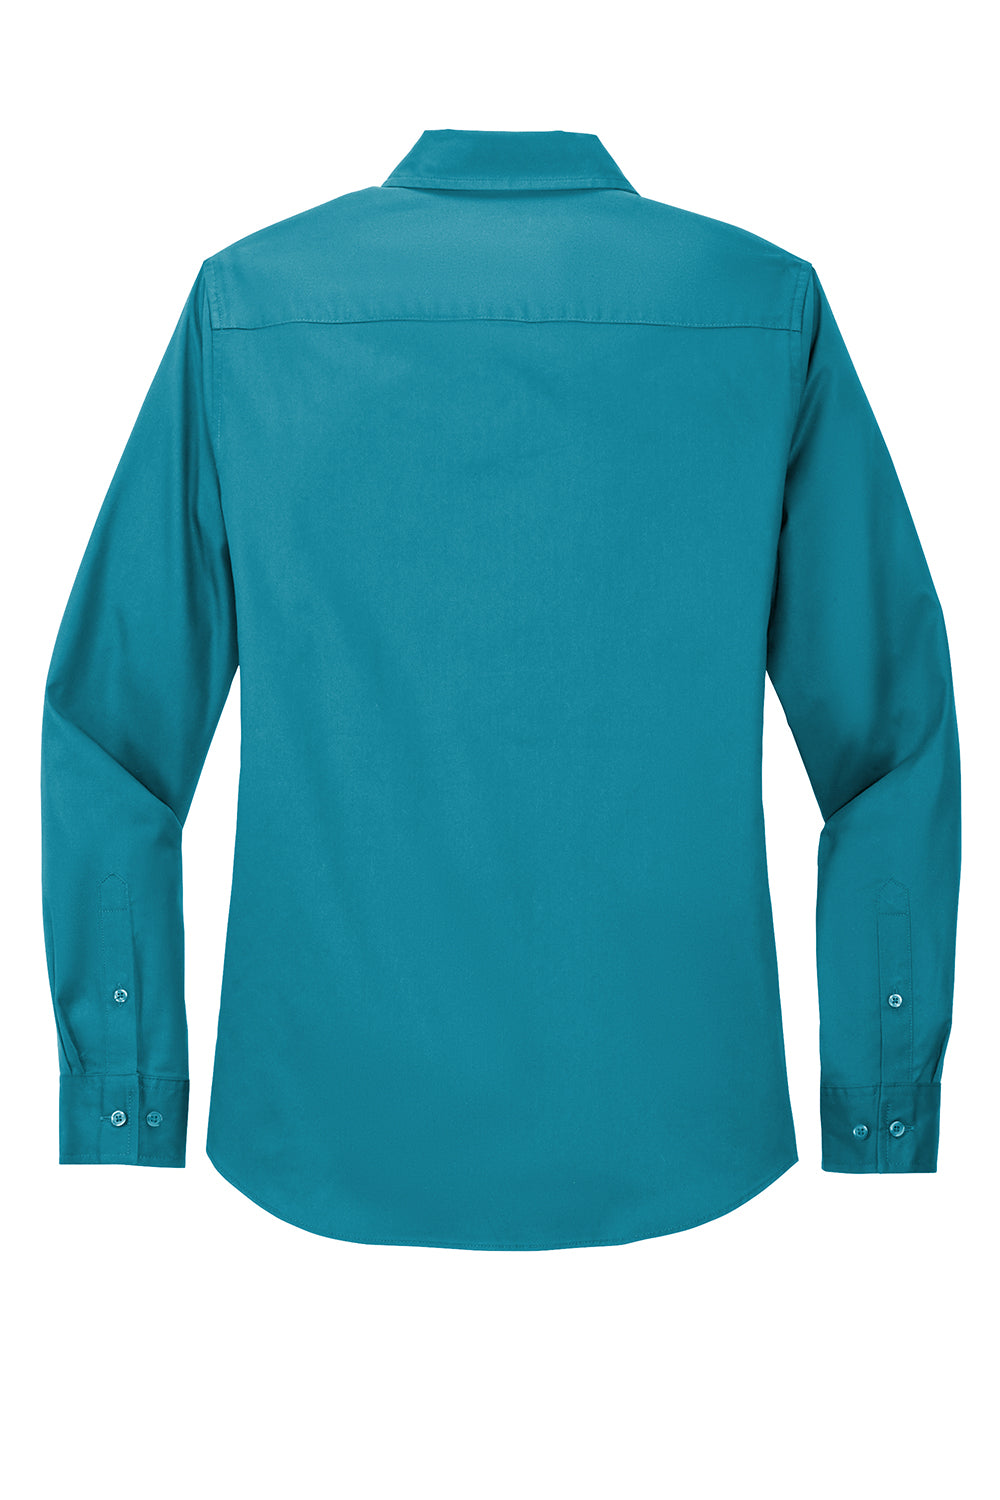 Port Authority L608 Womens Easy Care Wrinkle Resistant Long Sleeve Button Down Shirt Teal Green Flat Back